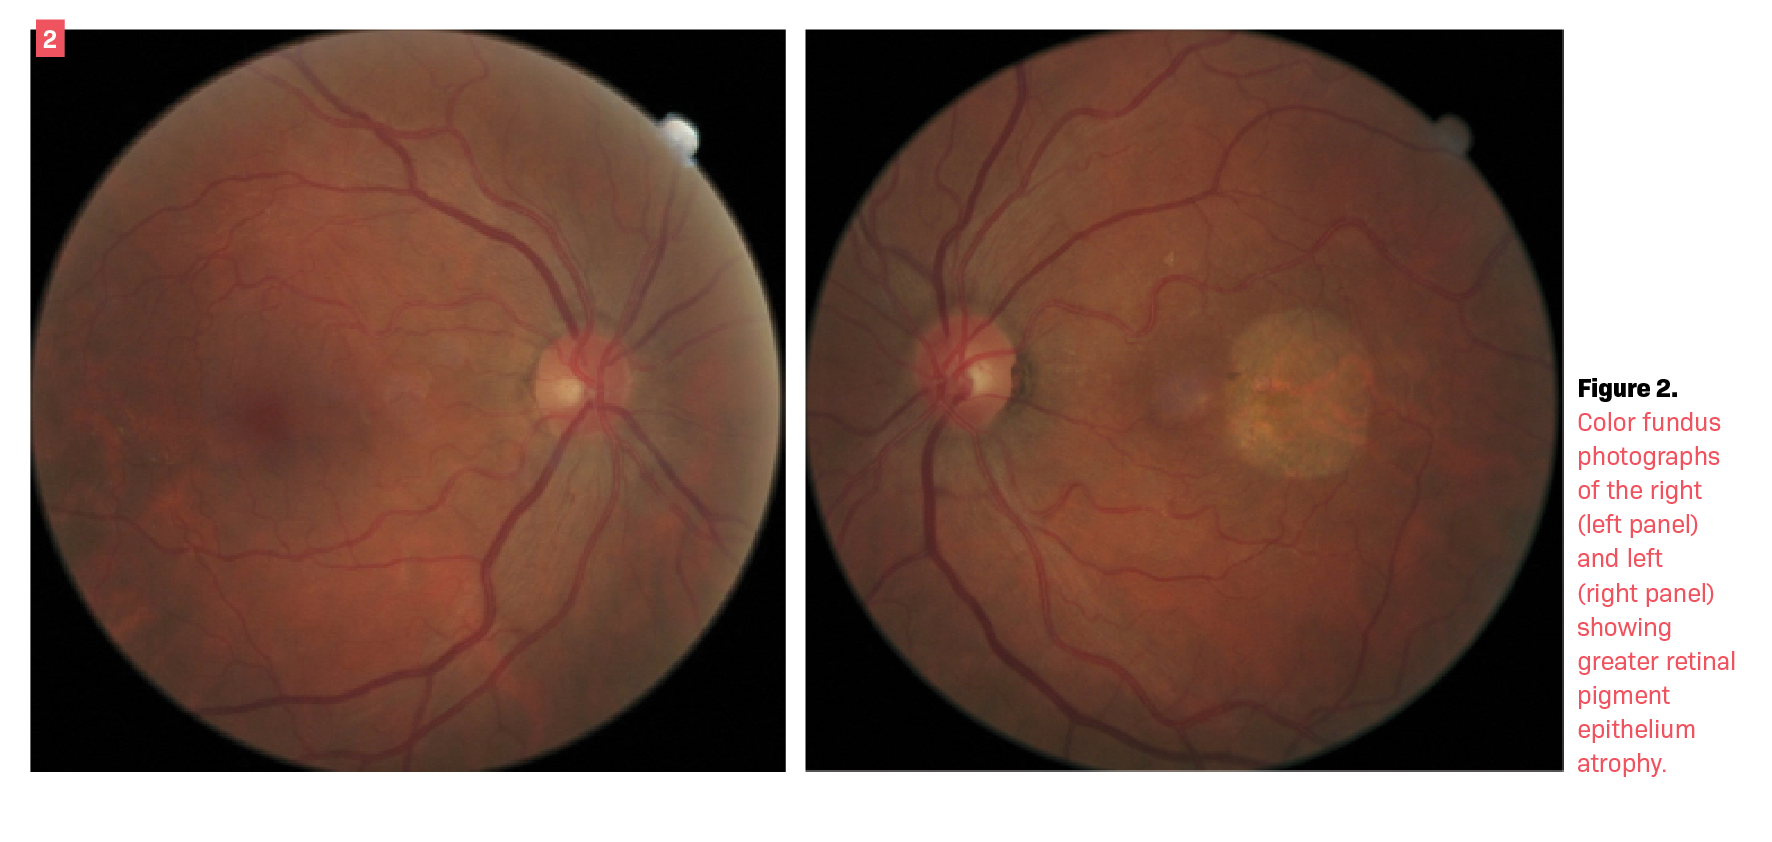 Central serous retinopathy is not a benign disease